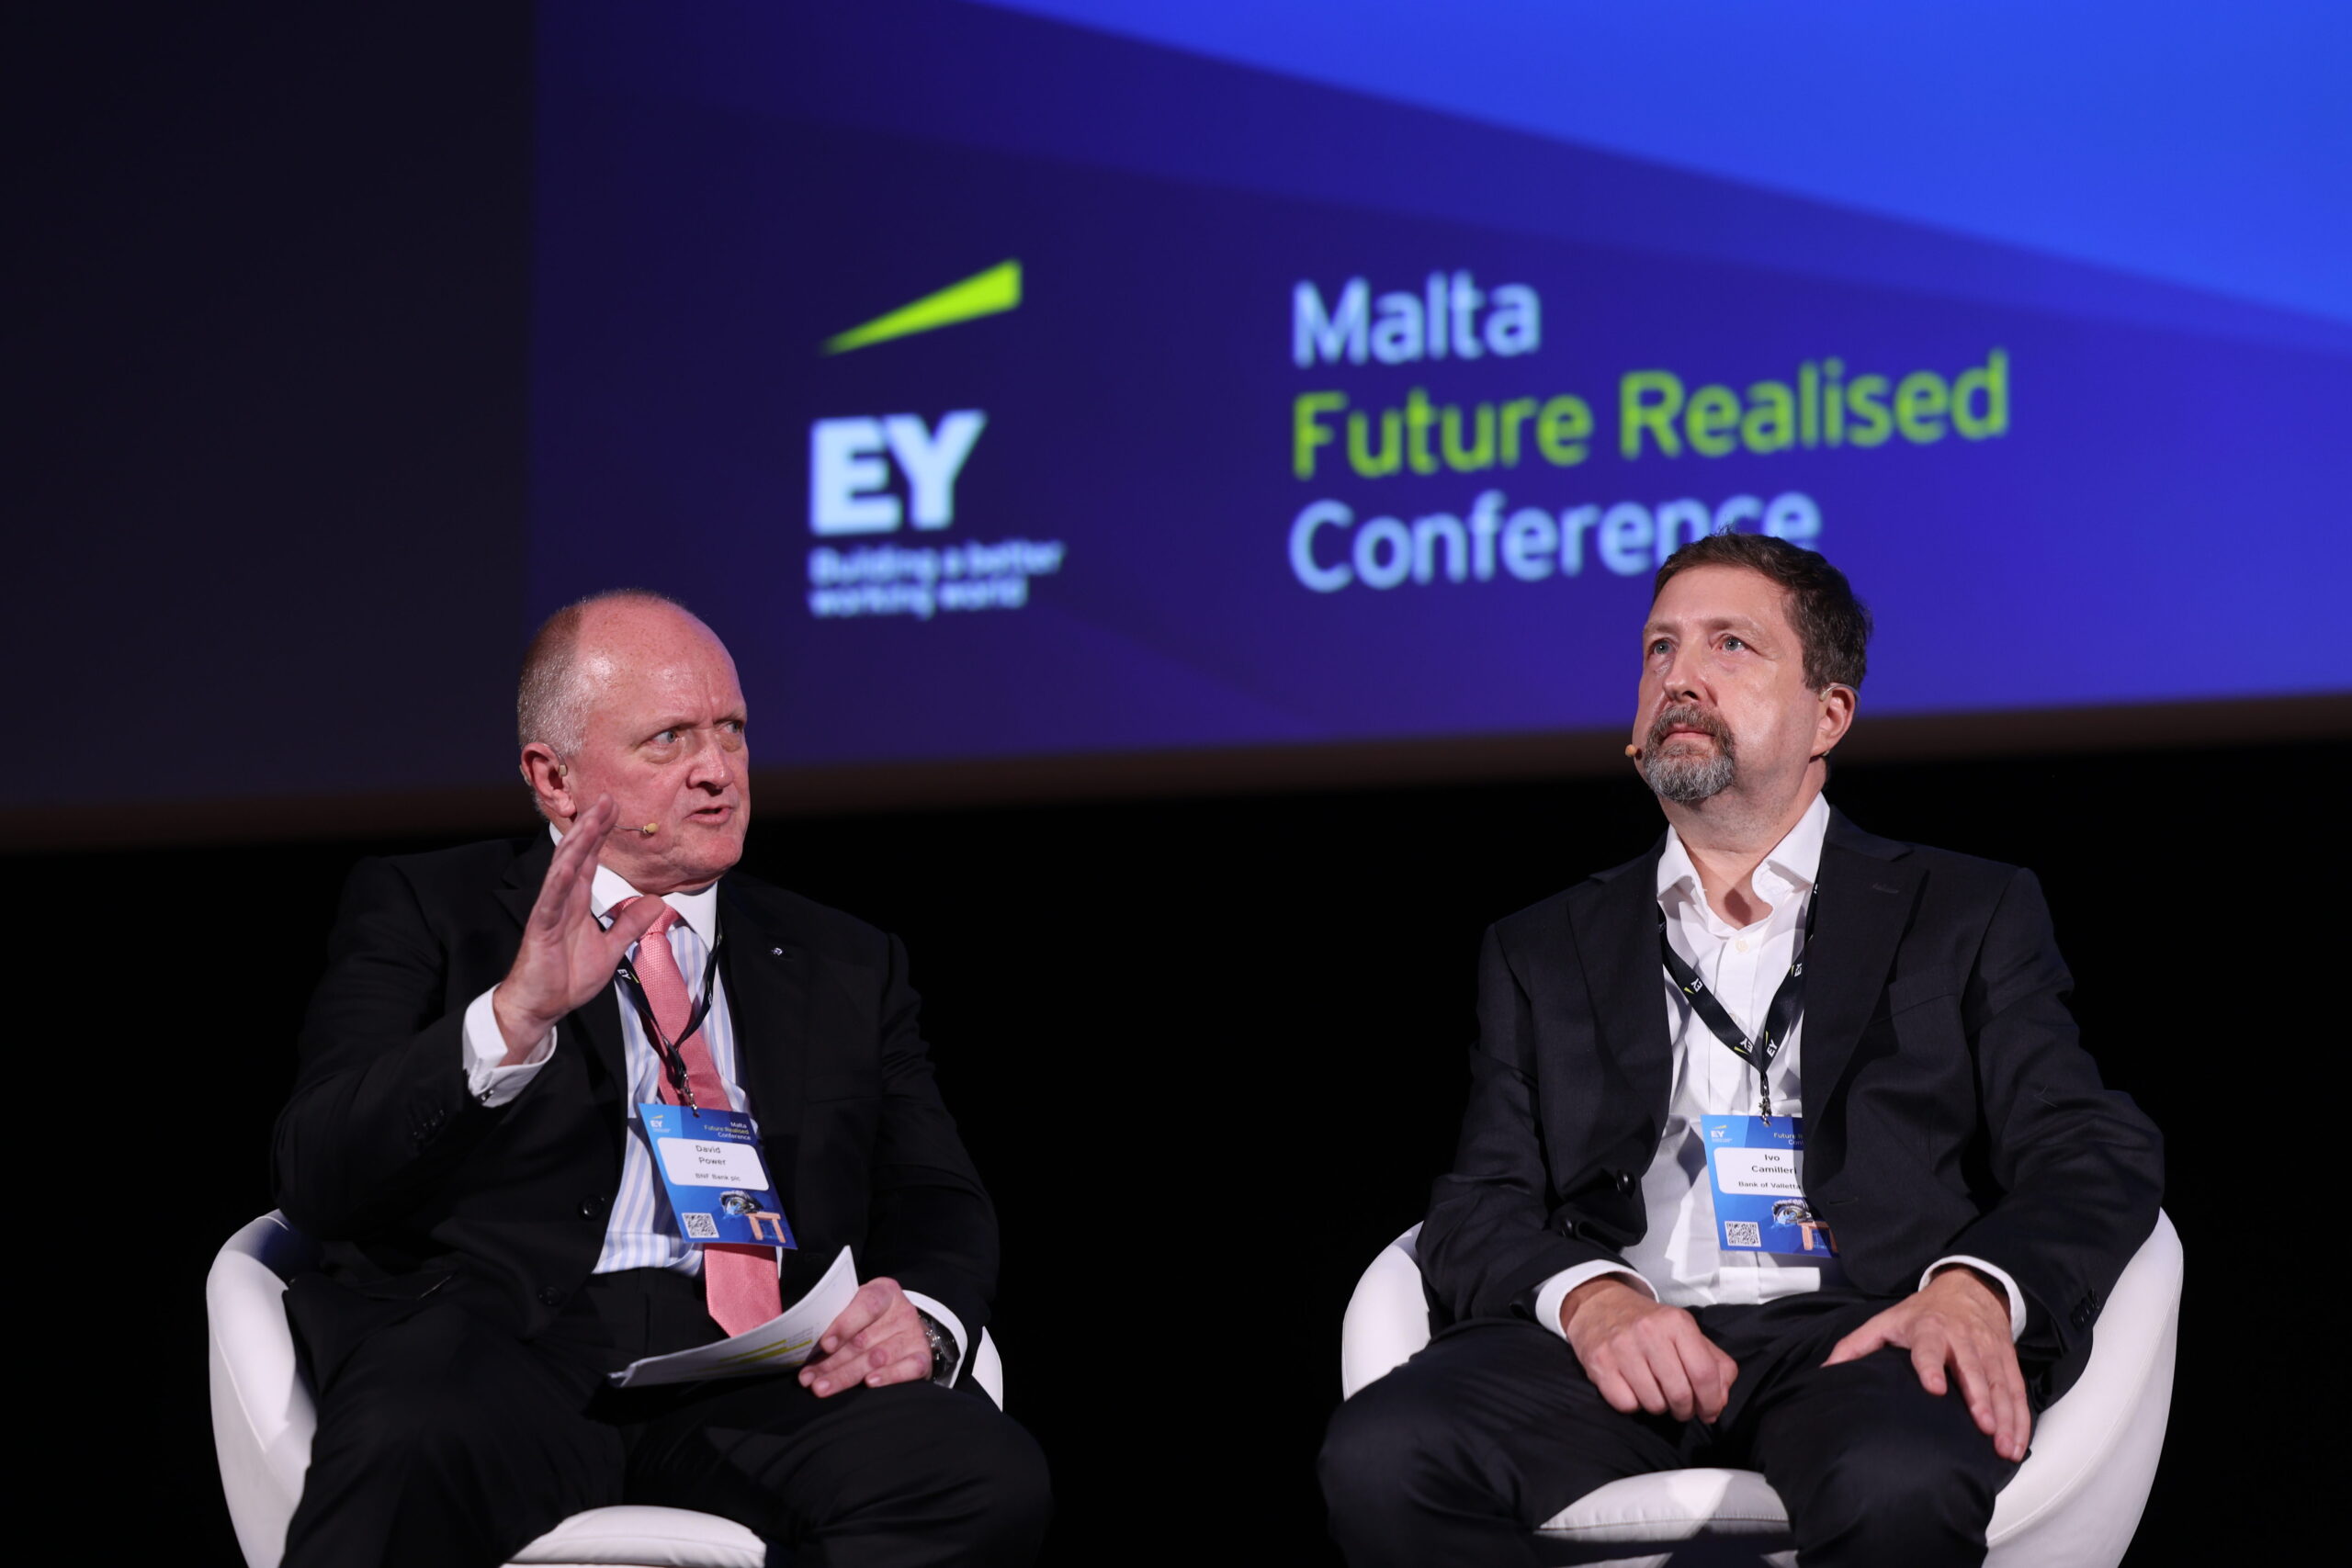 Key stakeholder BNF Bank shares its vision at EY’s annual conference